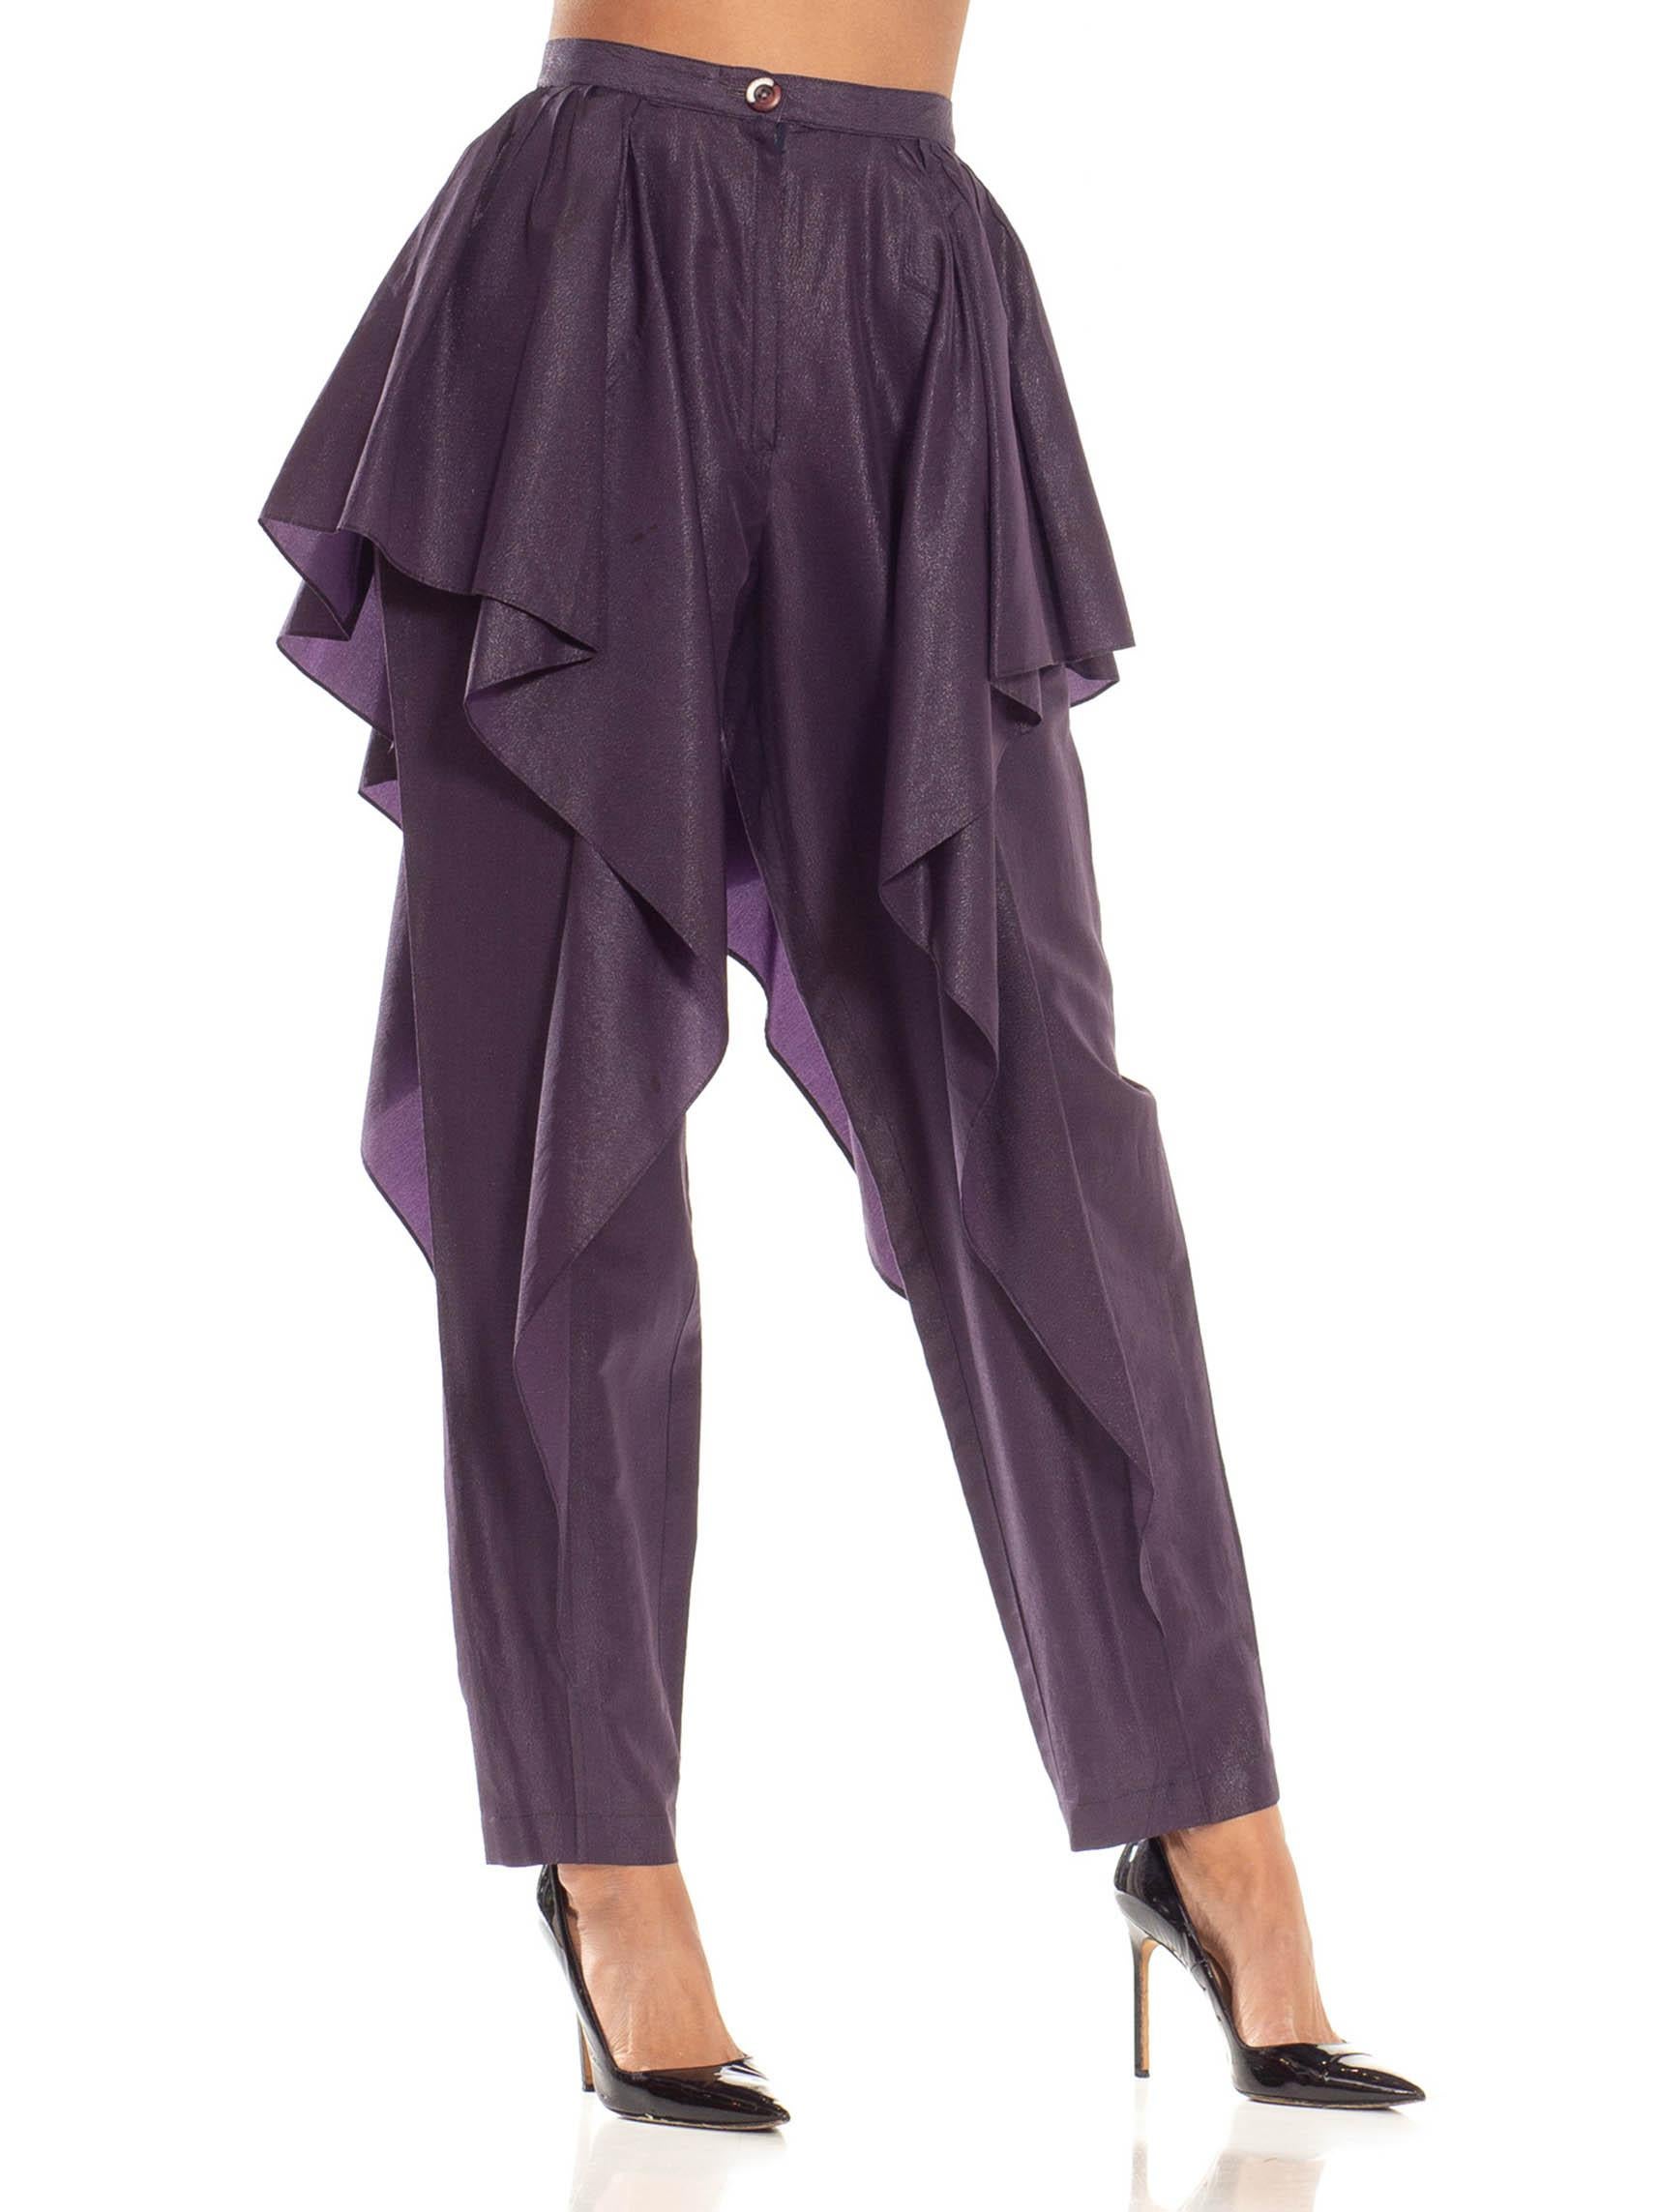 1970S ISSEY MIYAKE Eggplant Purple Pants In Excellent Condition For Sale In New York, NY